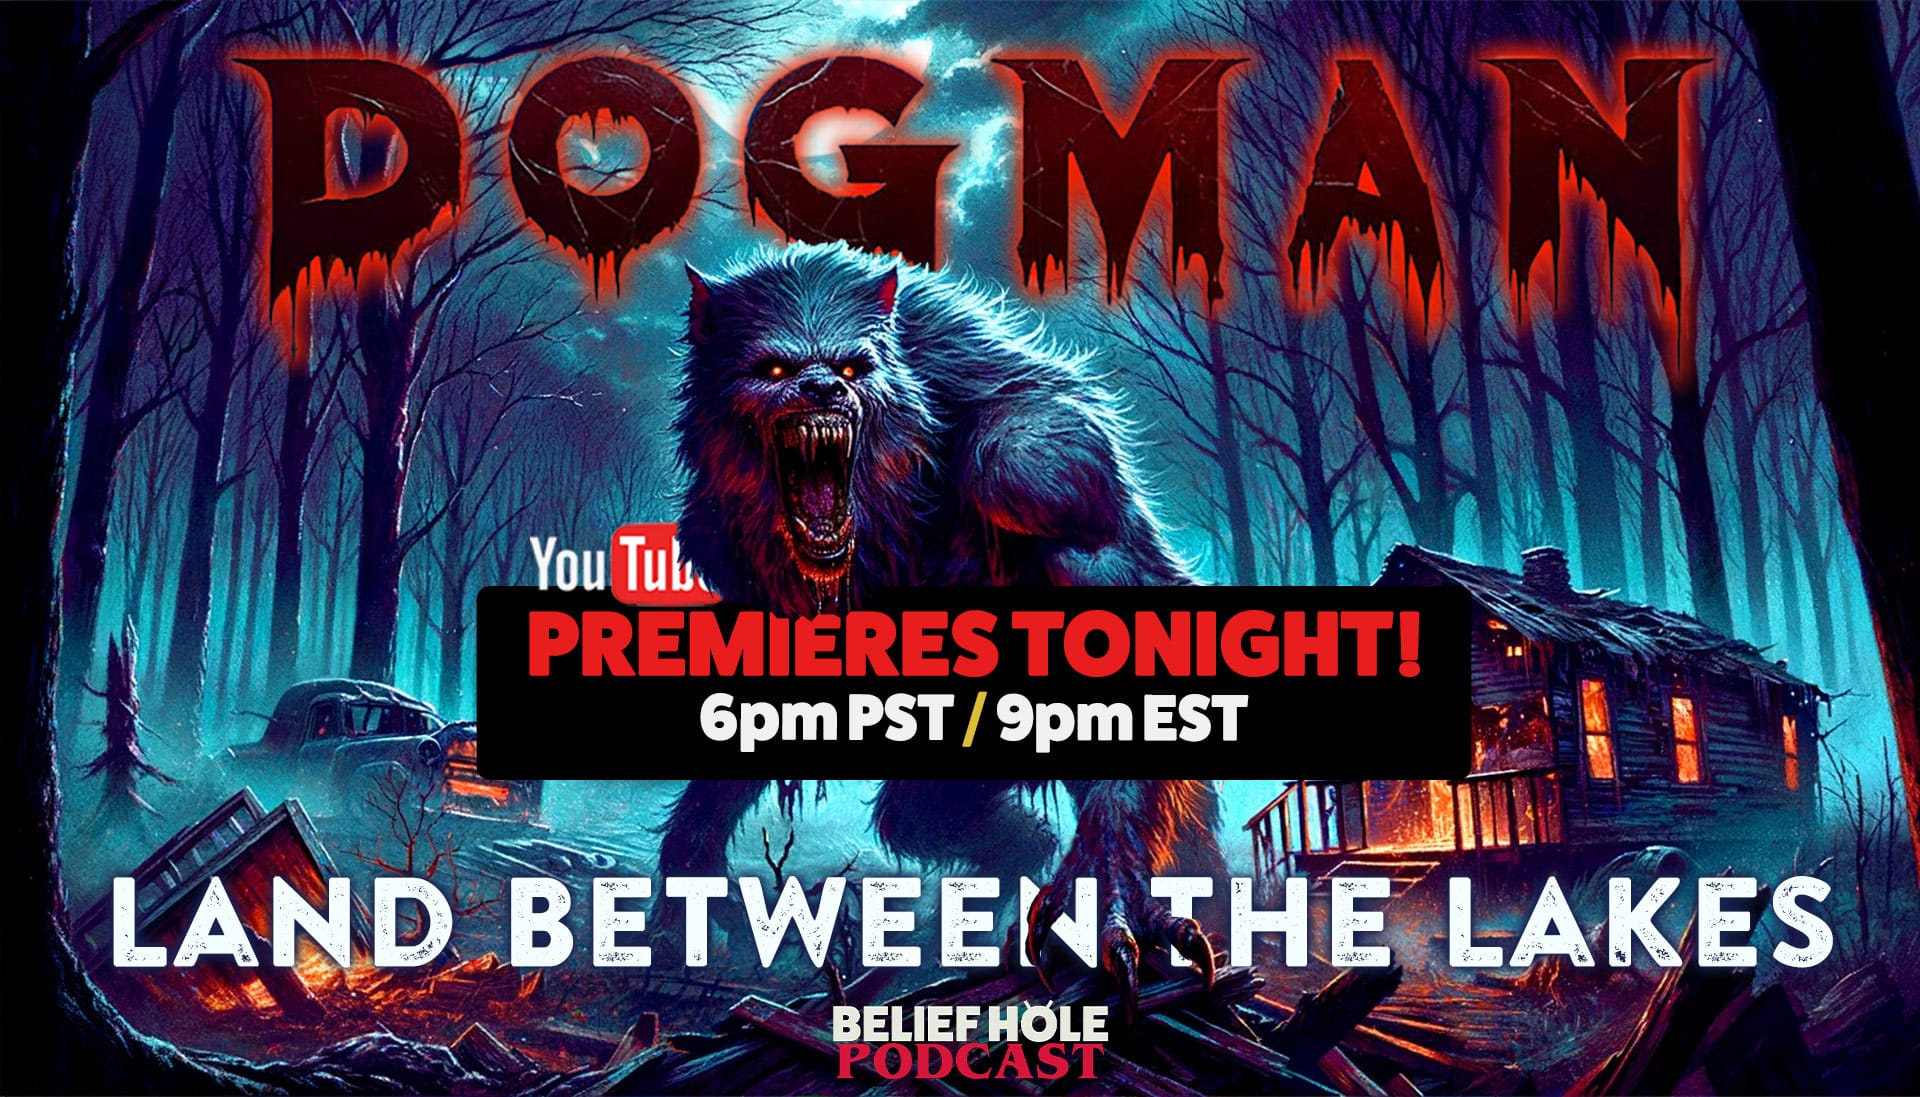 🔥🏕️Youtube Premiere TONIGHT: 9pm EST! Deadly Dogman of LBL! Join us in the Chat!